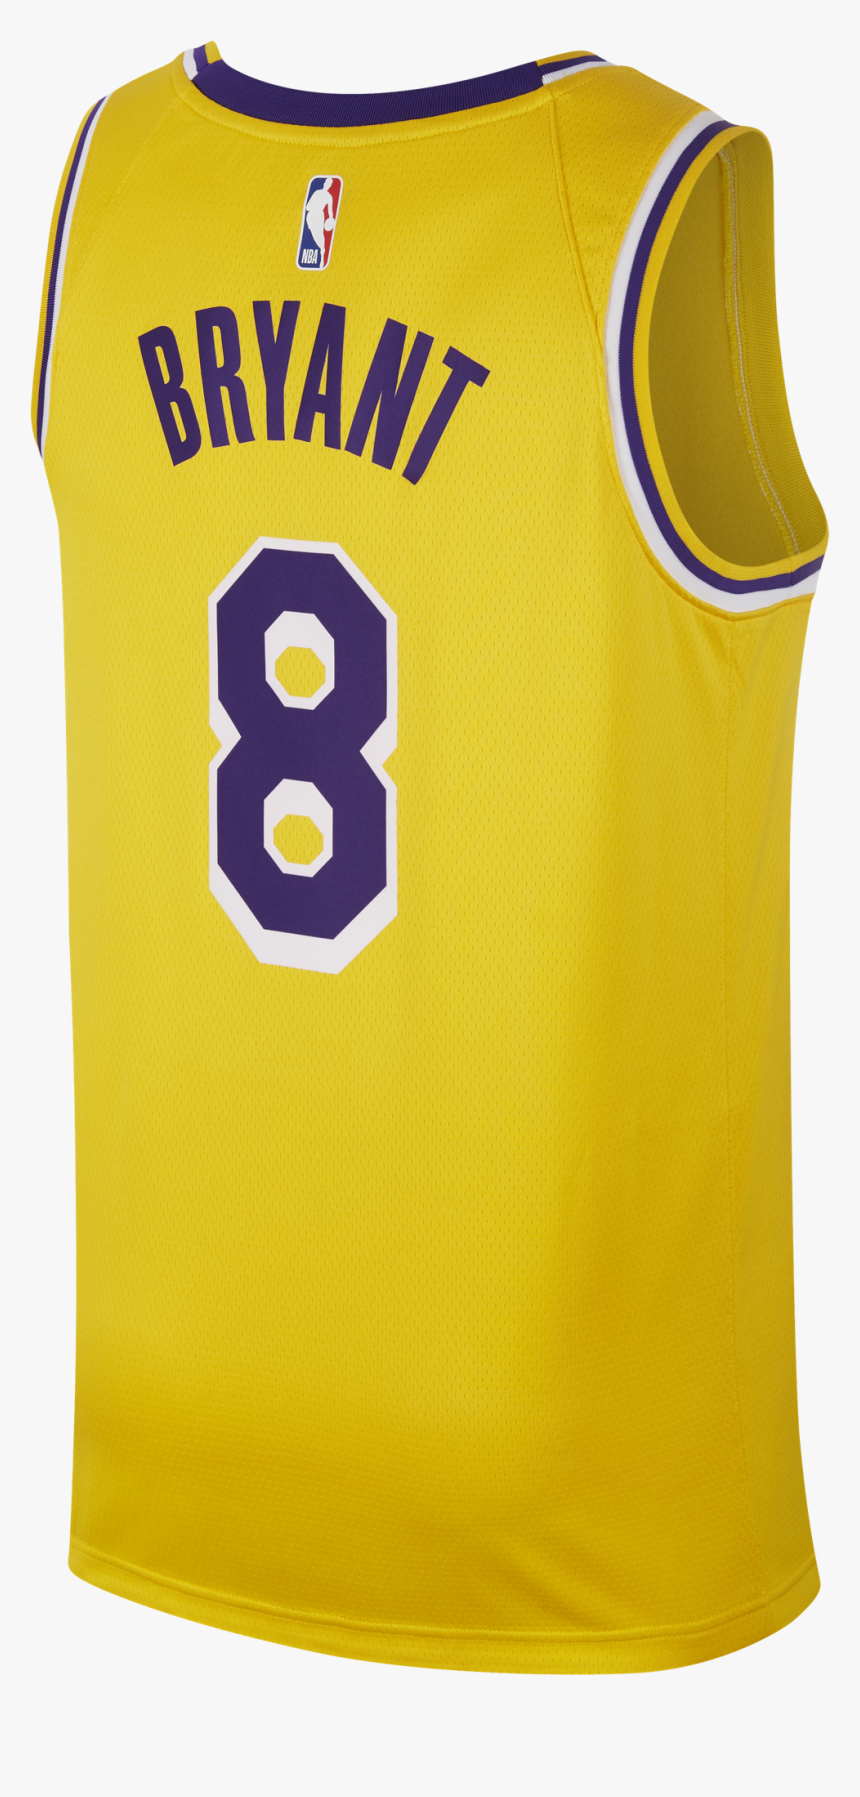 number 8 lakers jersey